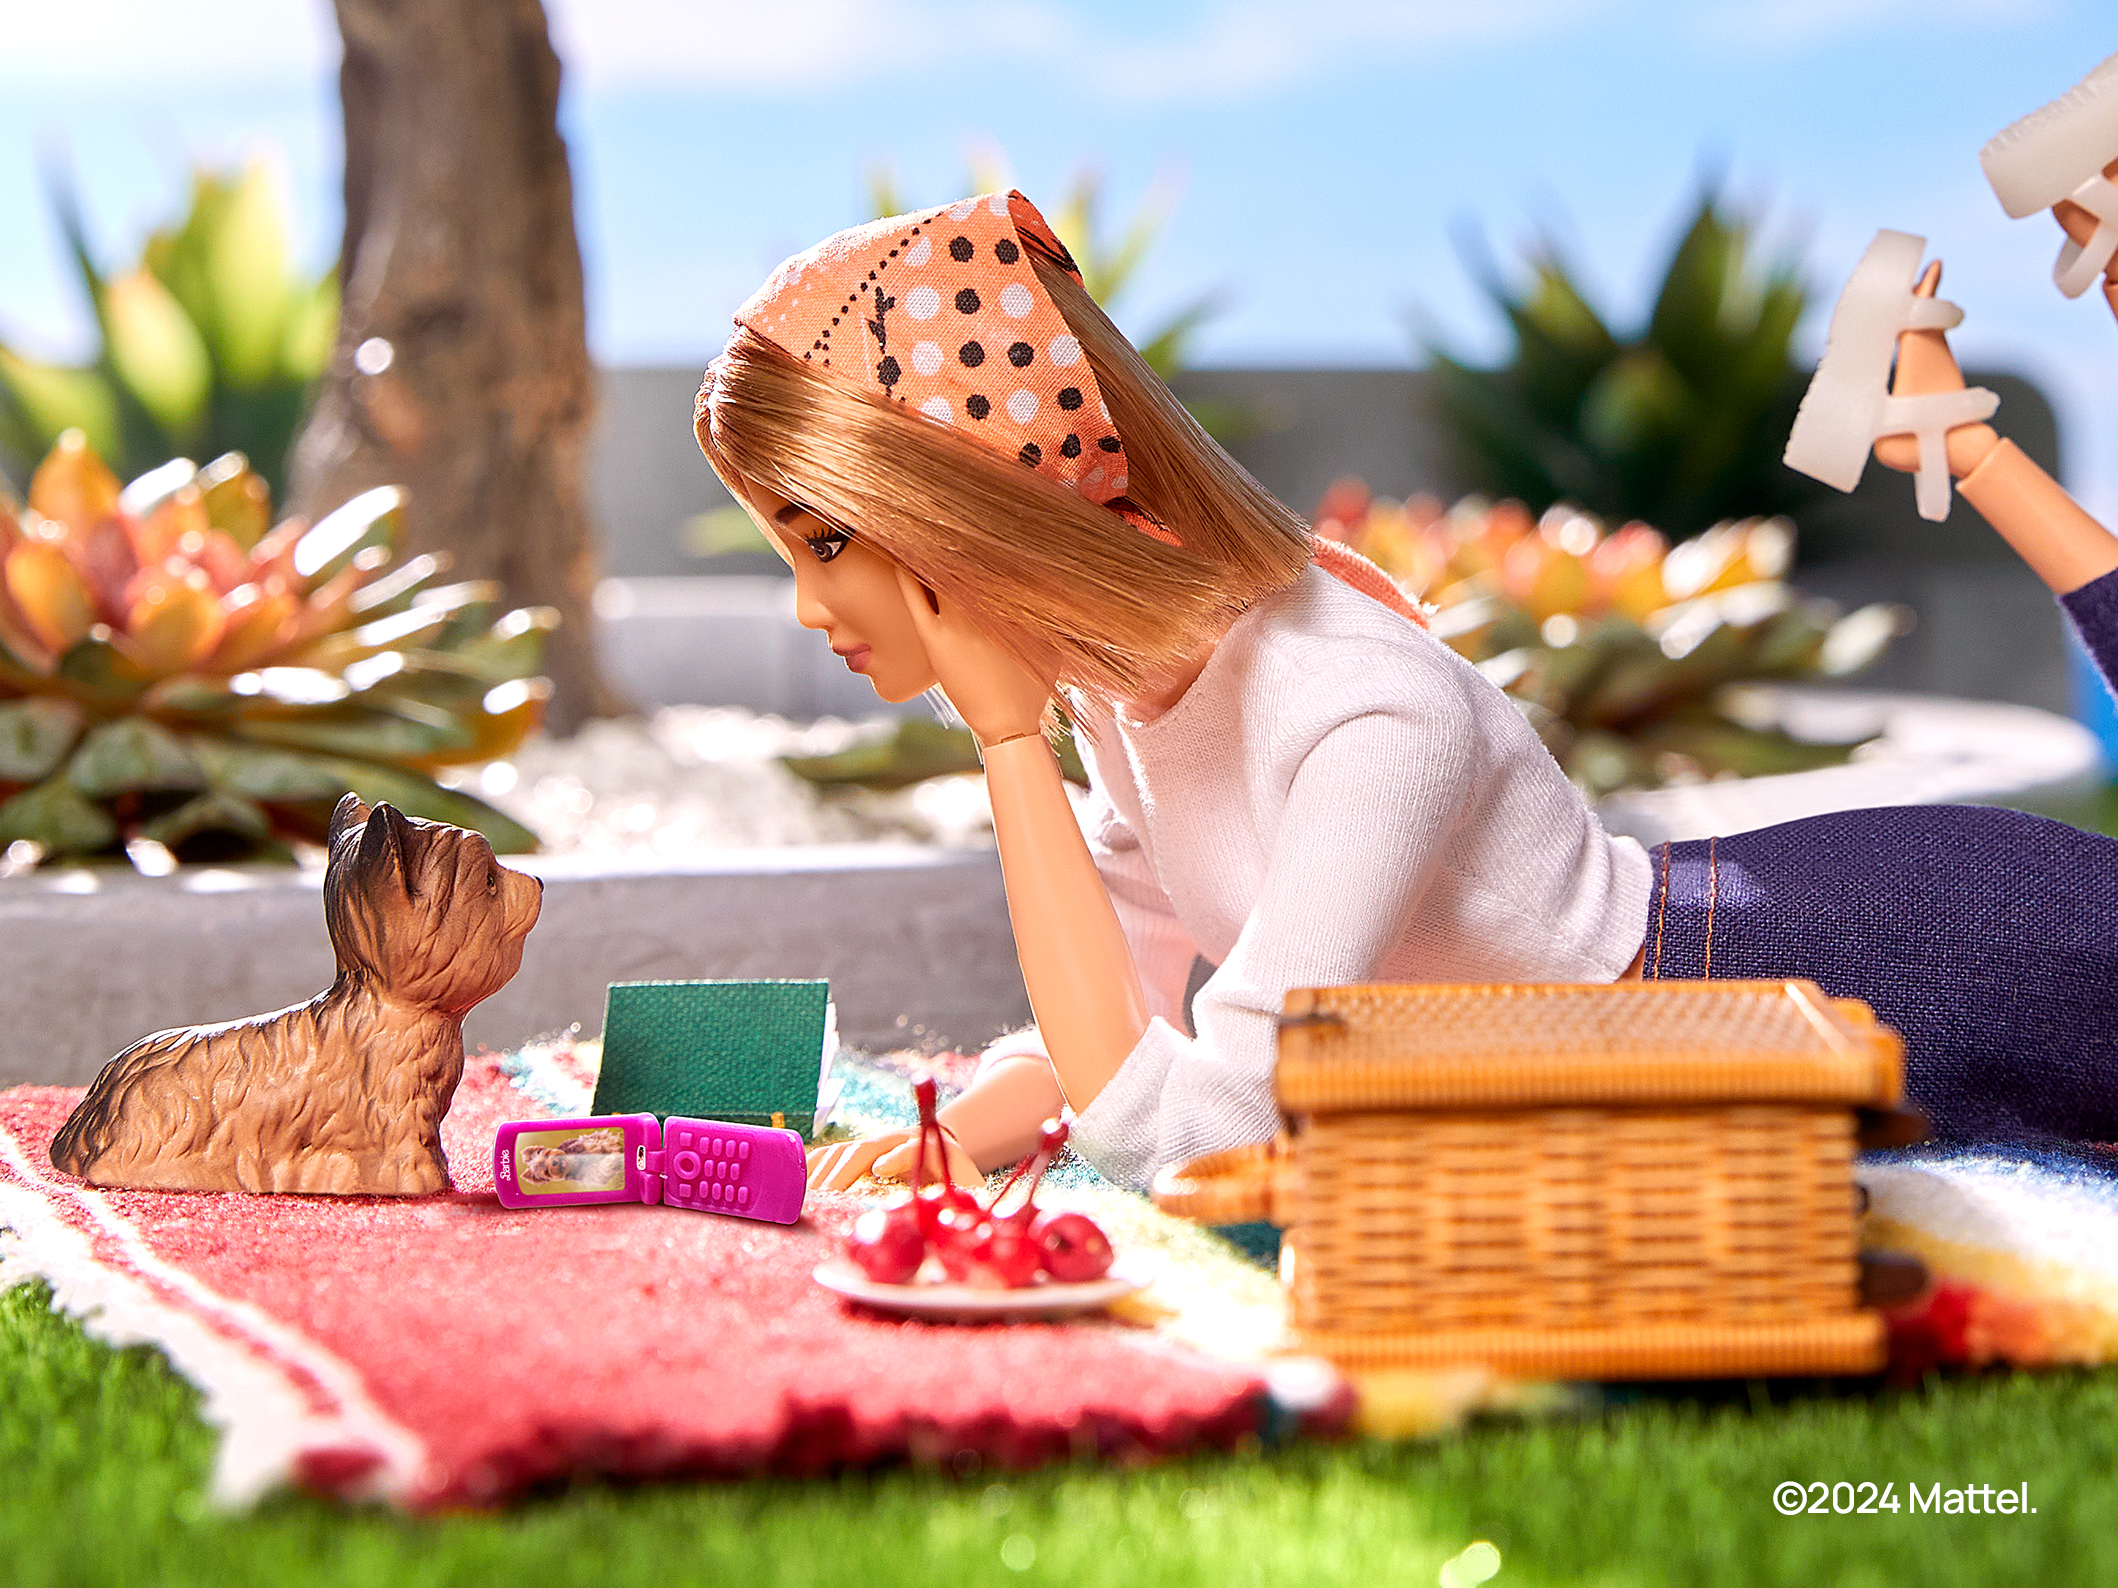 Barbie gets an HMD feature phone.